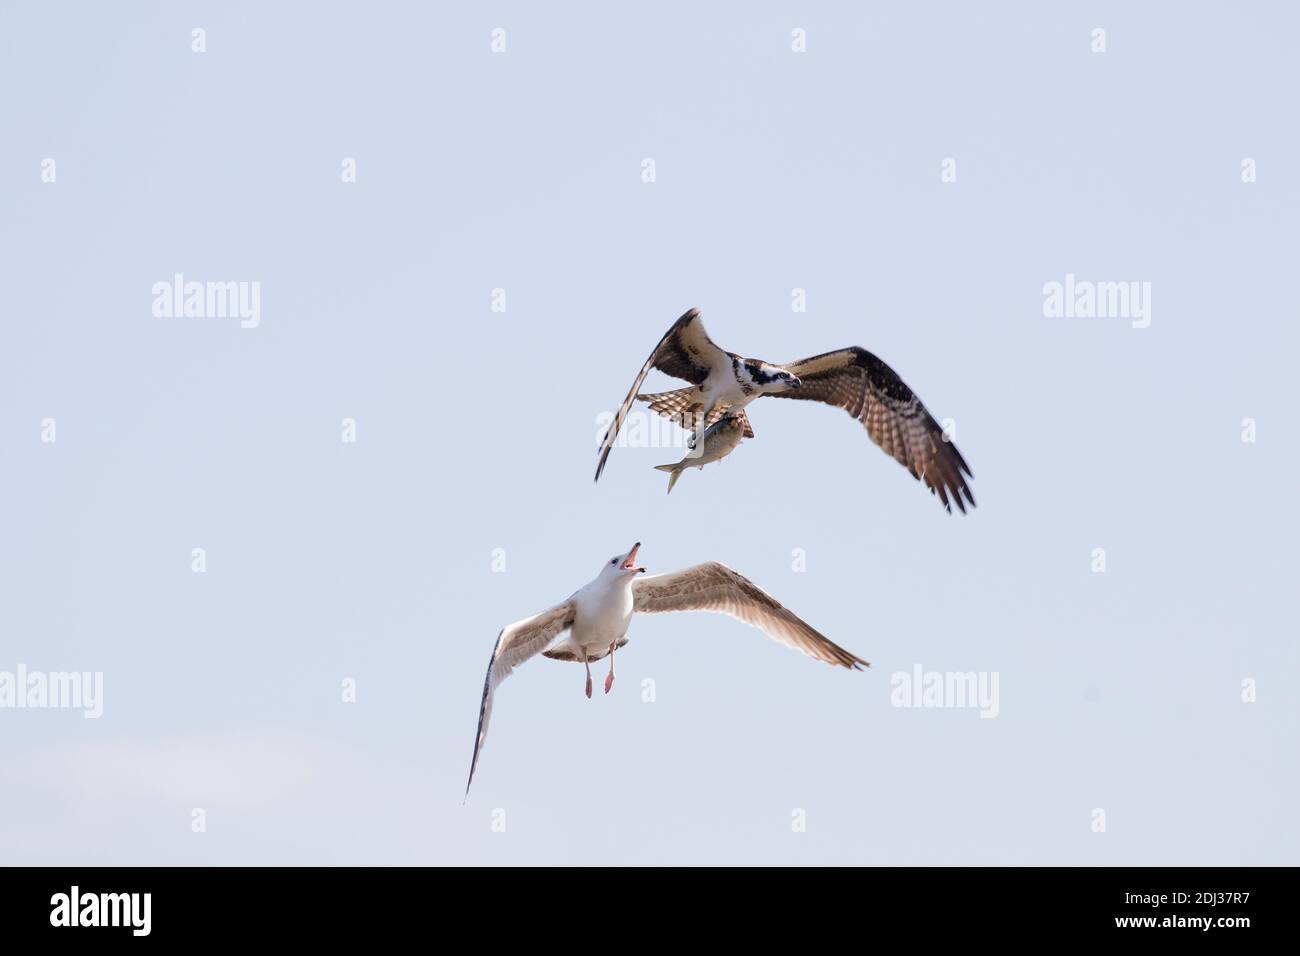 Great Black-backed Gull (Larus marinus) attempting to steal a fish from an Osprey (Pandion haliaetus), Long Island, New York Stock Photo